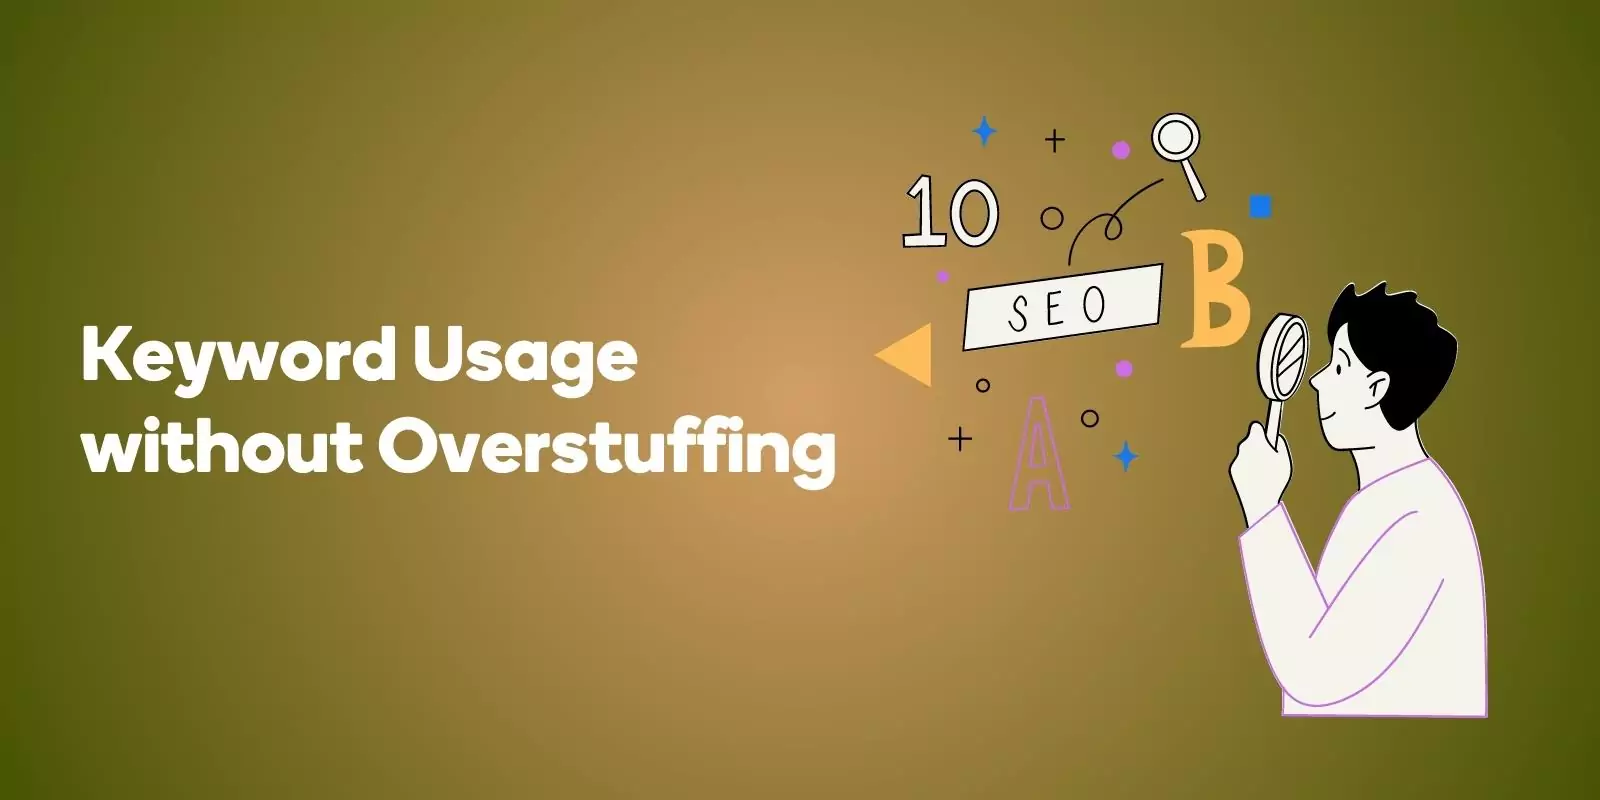 Keyword Usage without Overstuffing